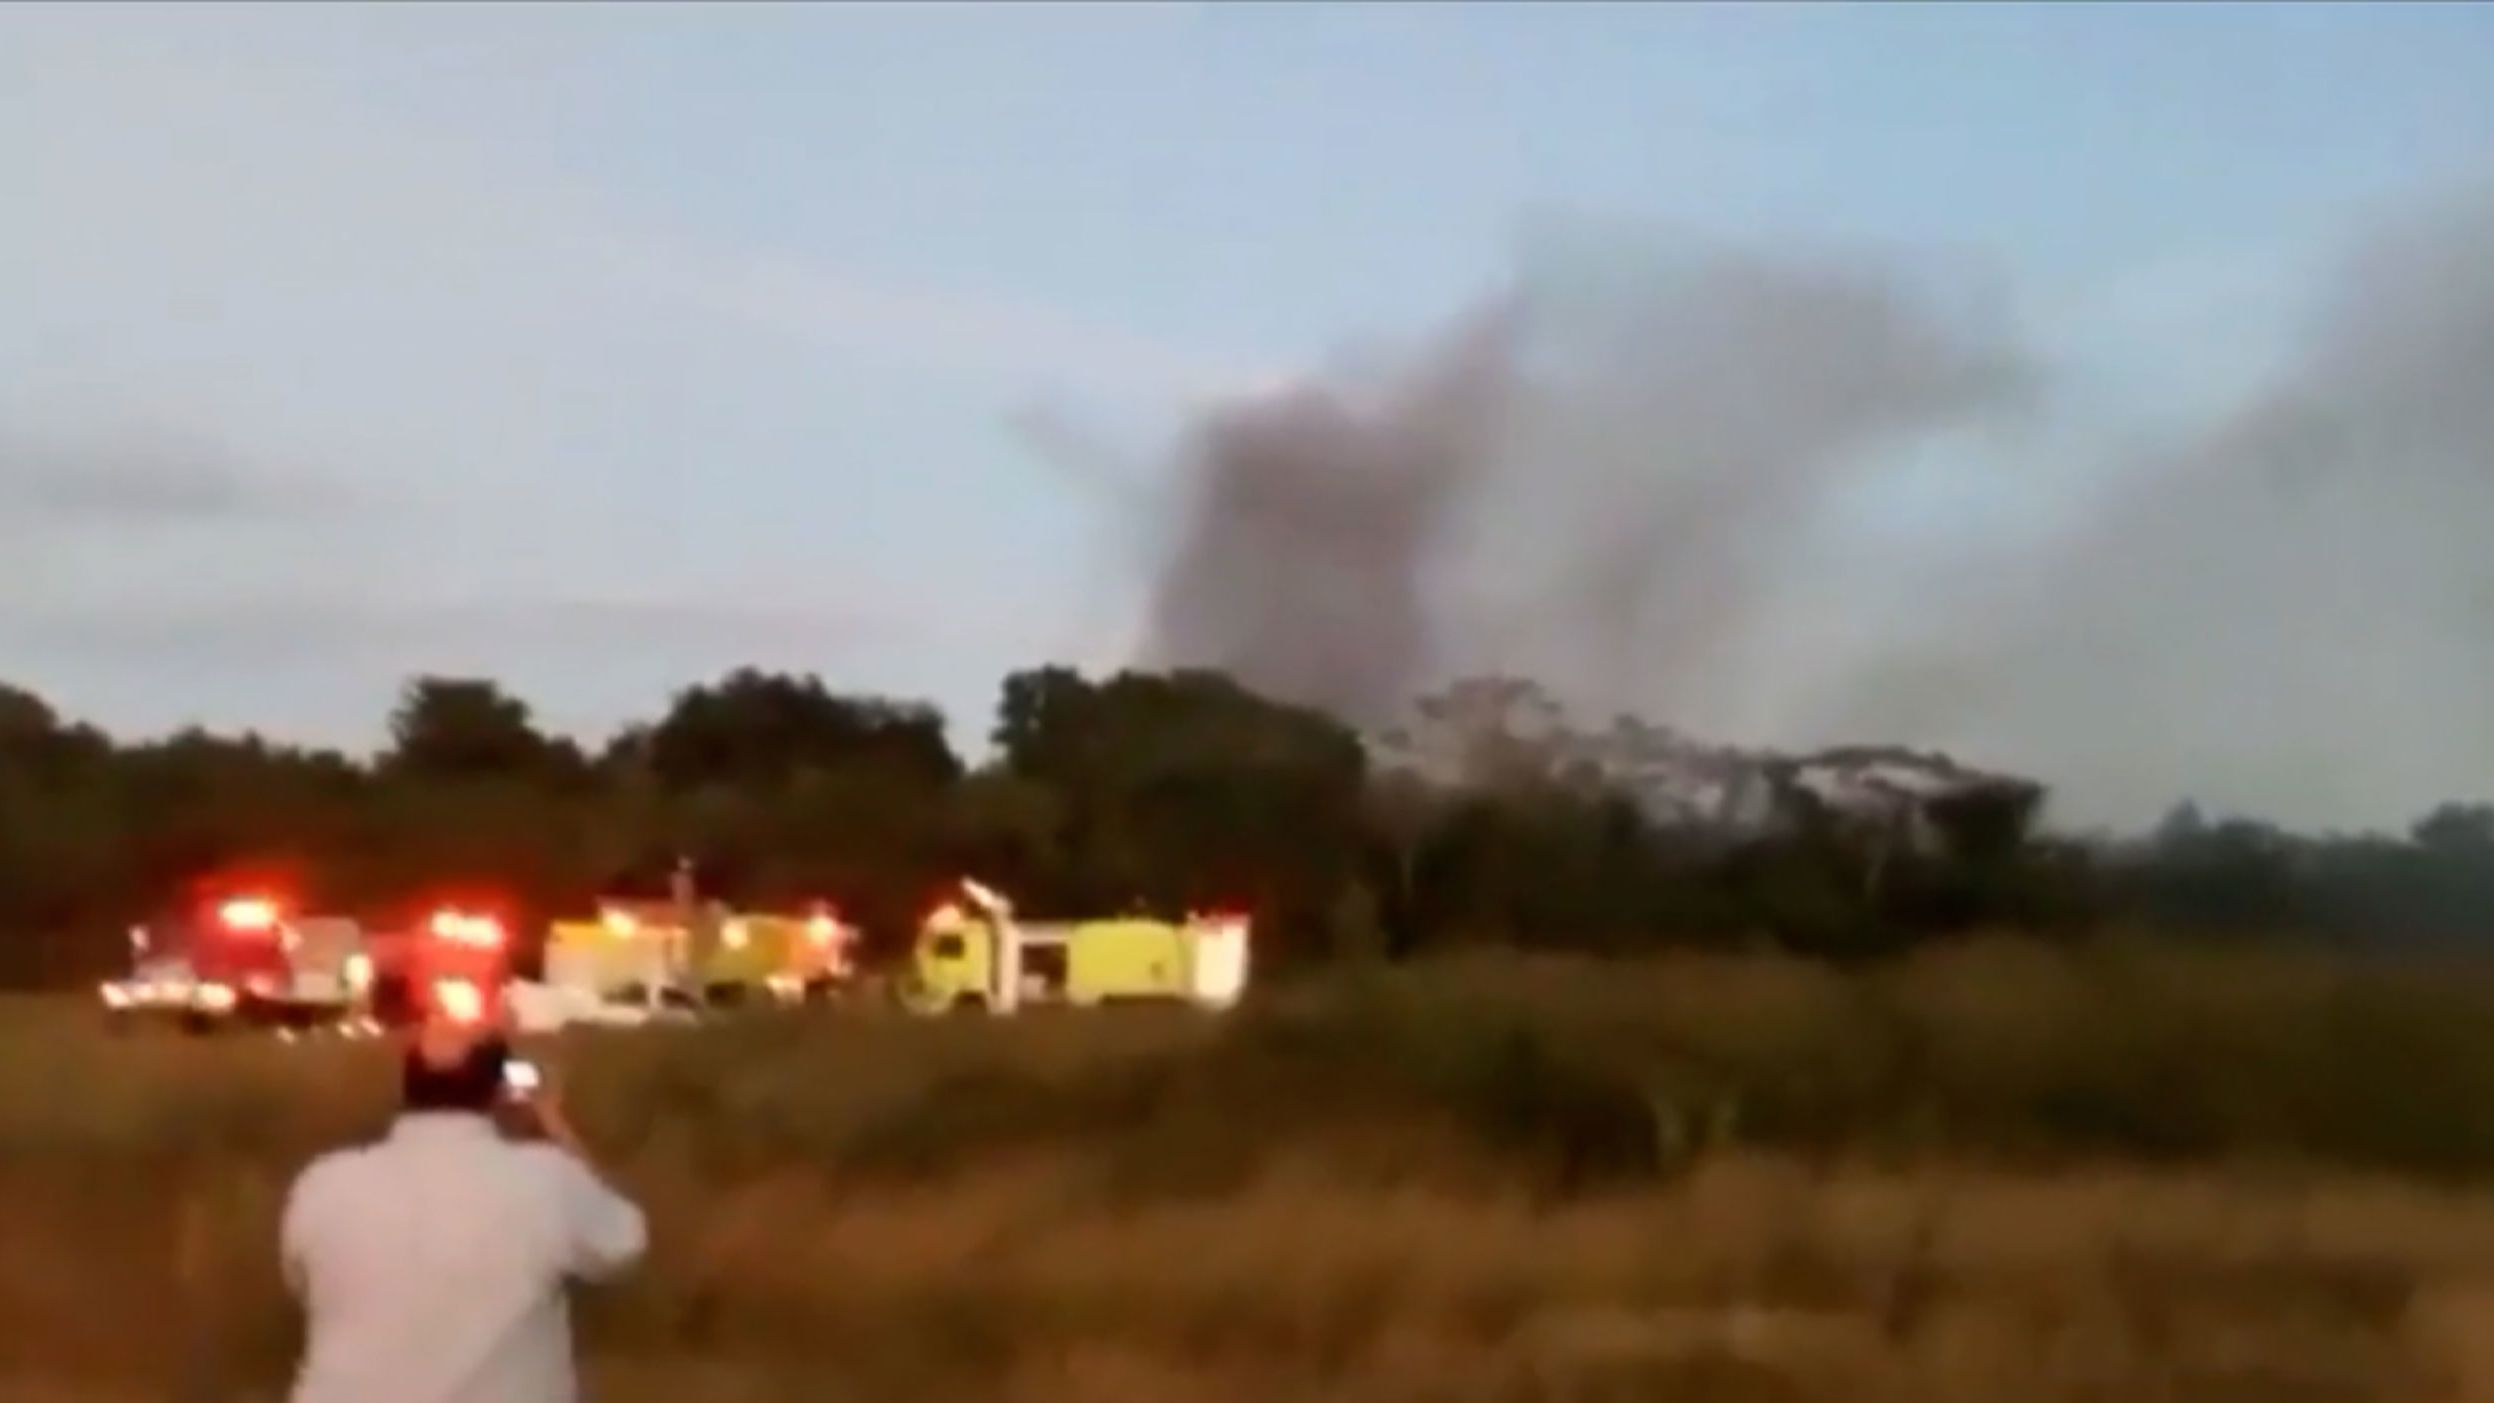 Seven passengers and two crew members of a private passenger plane were killed in the crash at Las Americas Airport in Santo Domingo on Wednesday.